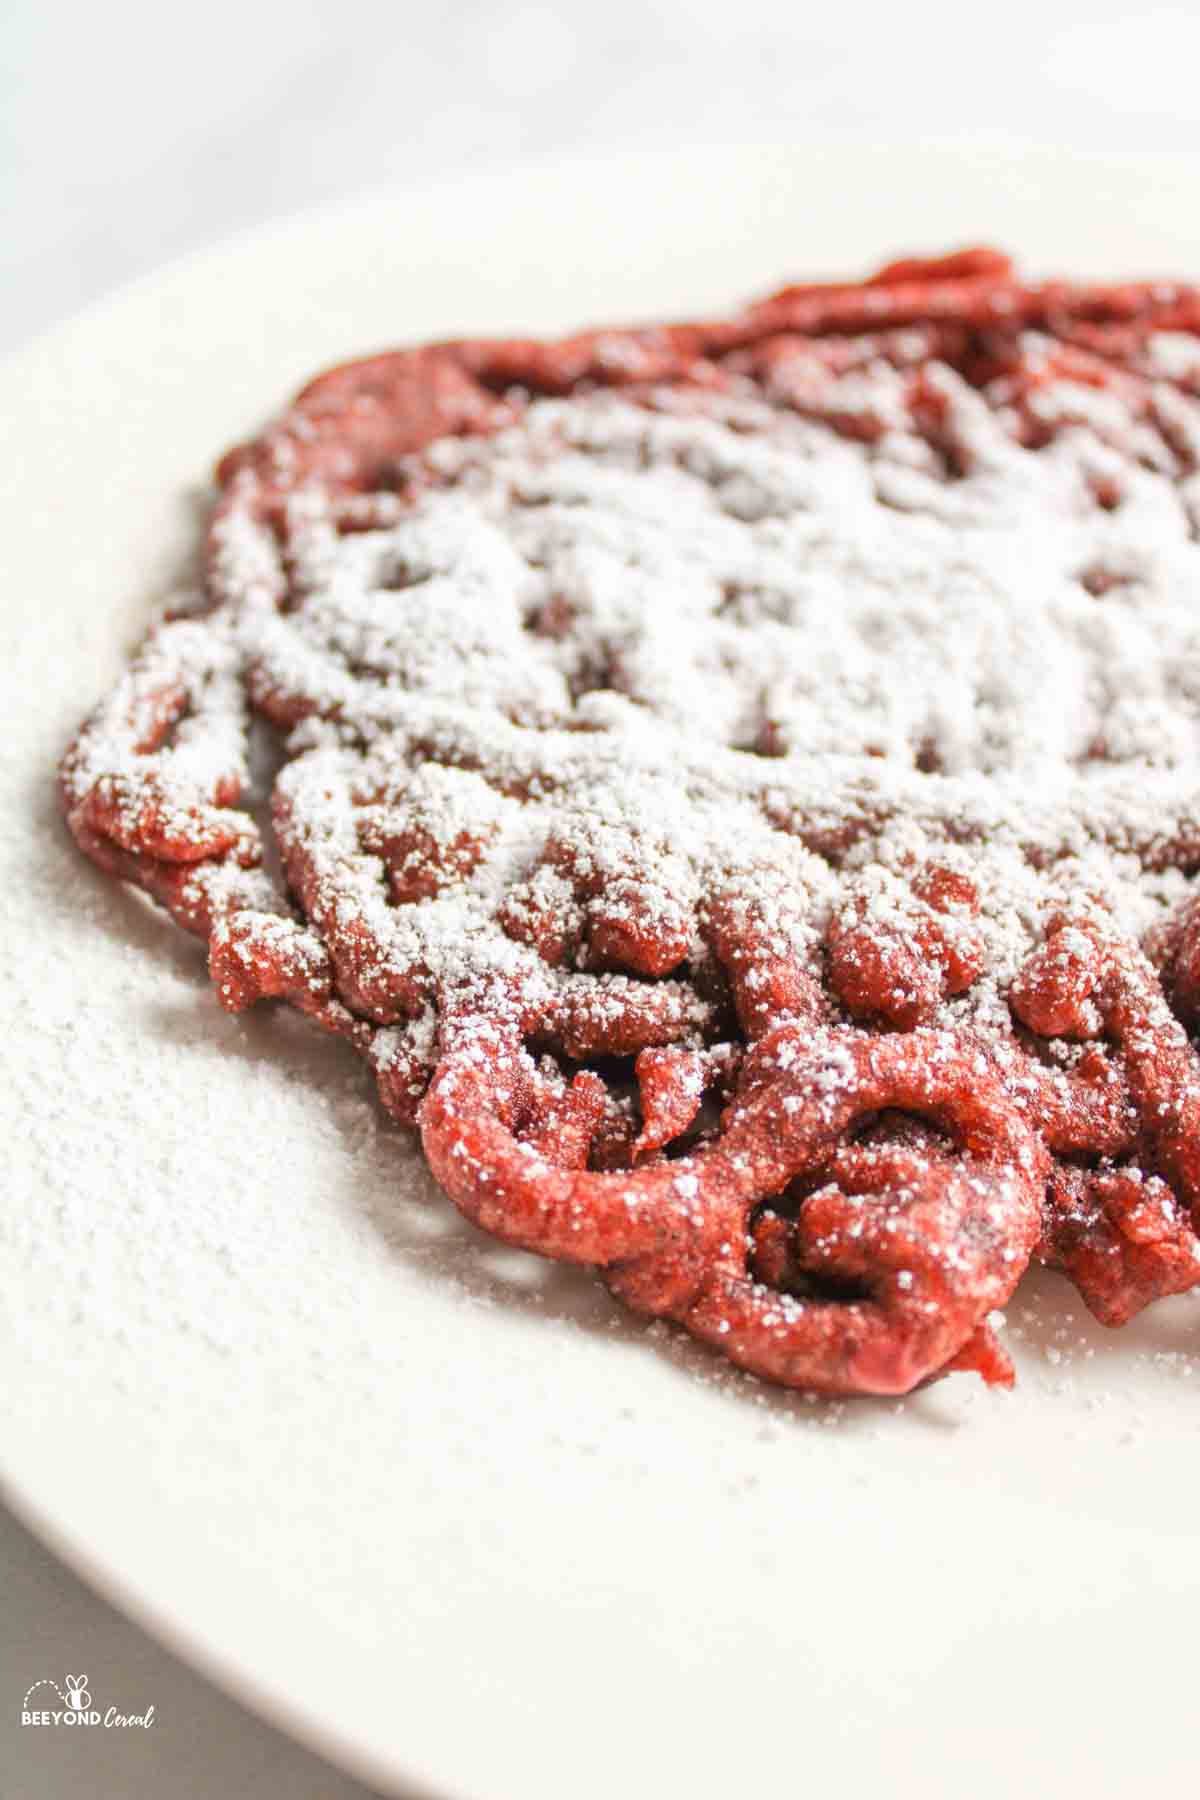 side view of a plate with red velvet funnel cake and powdered sugar on top